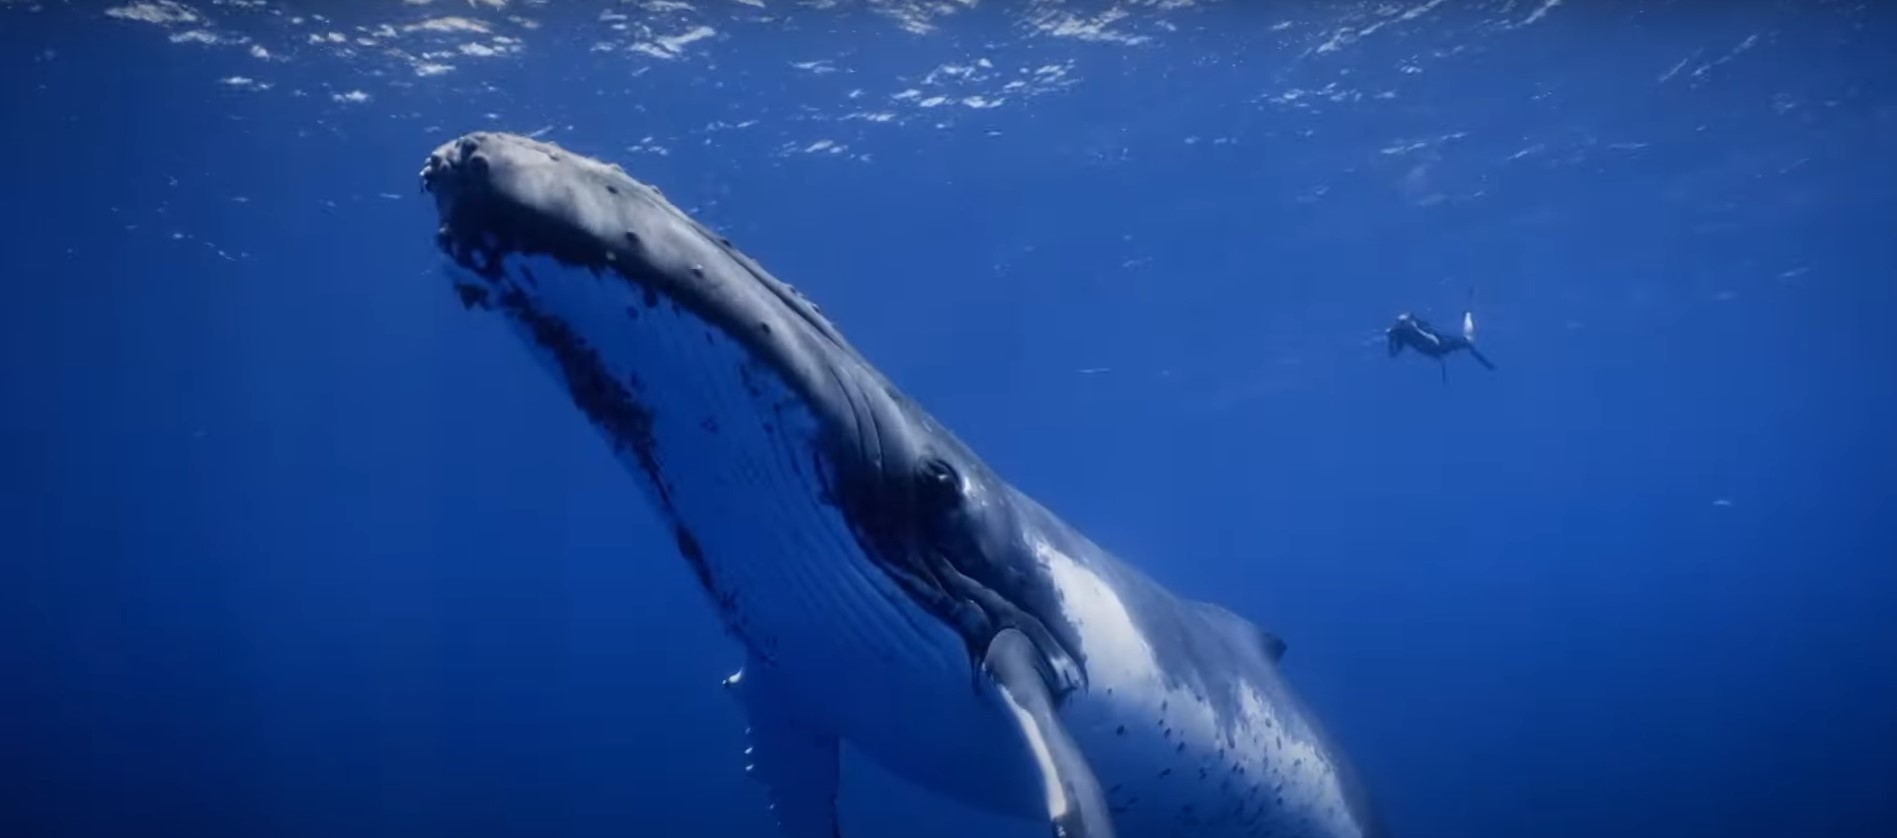 Humpback whales are known for their amazing song (Source - National Geographic Secrets of the Whales documentary)